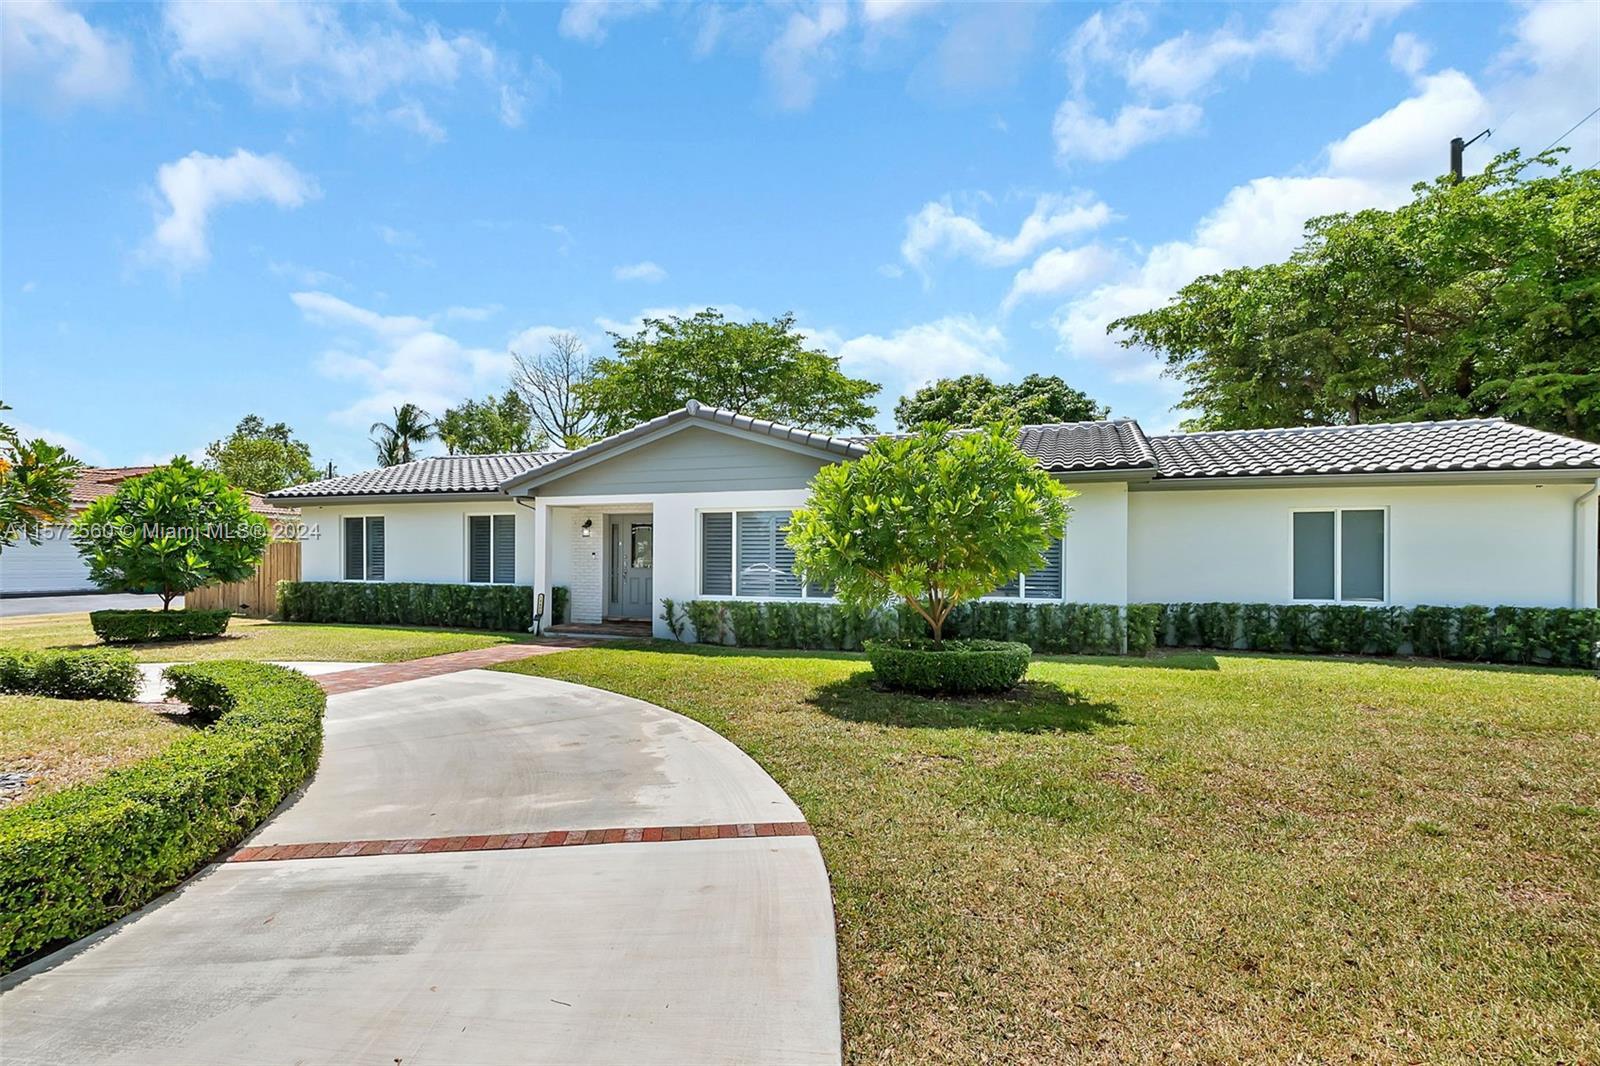 This stunning 4 bedroom, 2.5 bath north Palmetto Bay home with a screened pool is perfect for entert